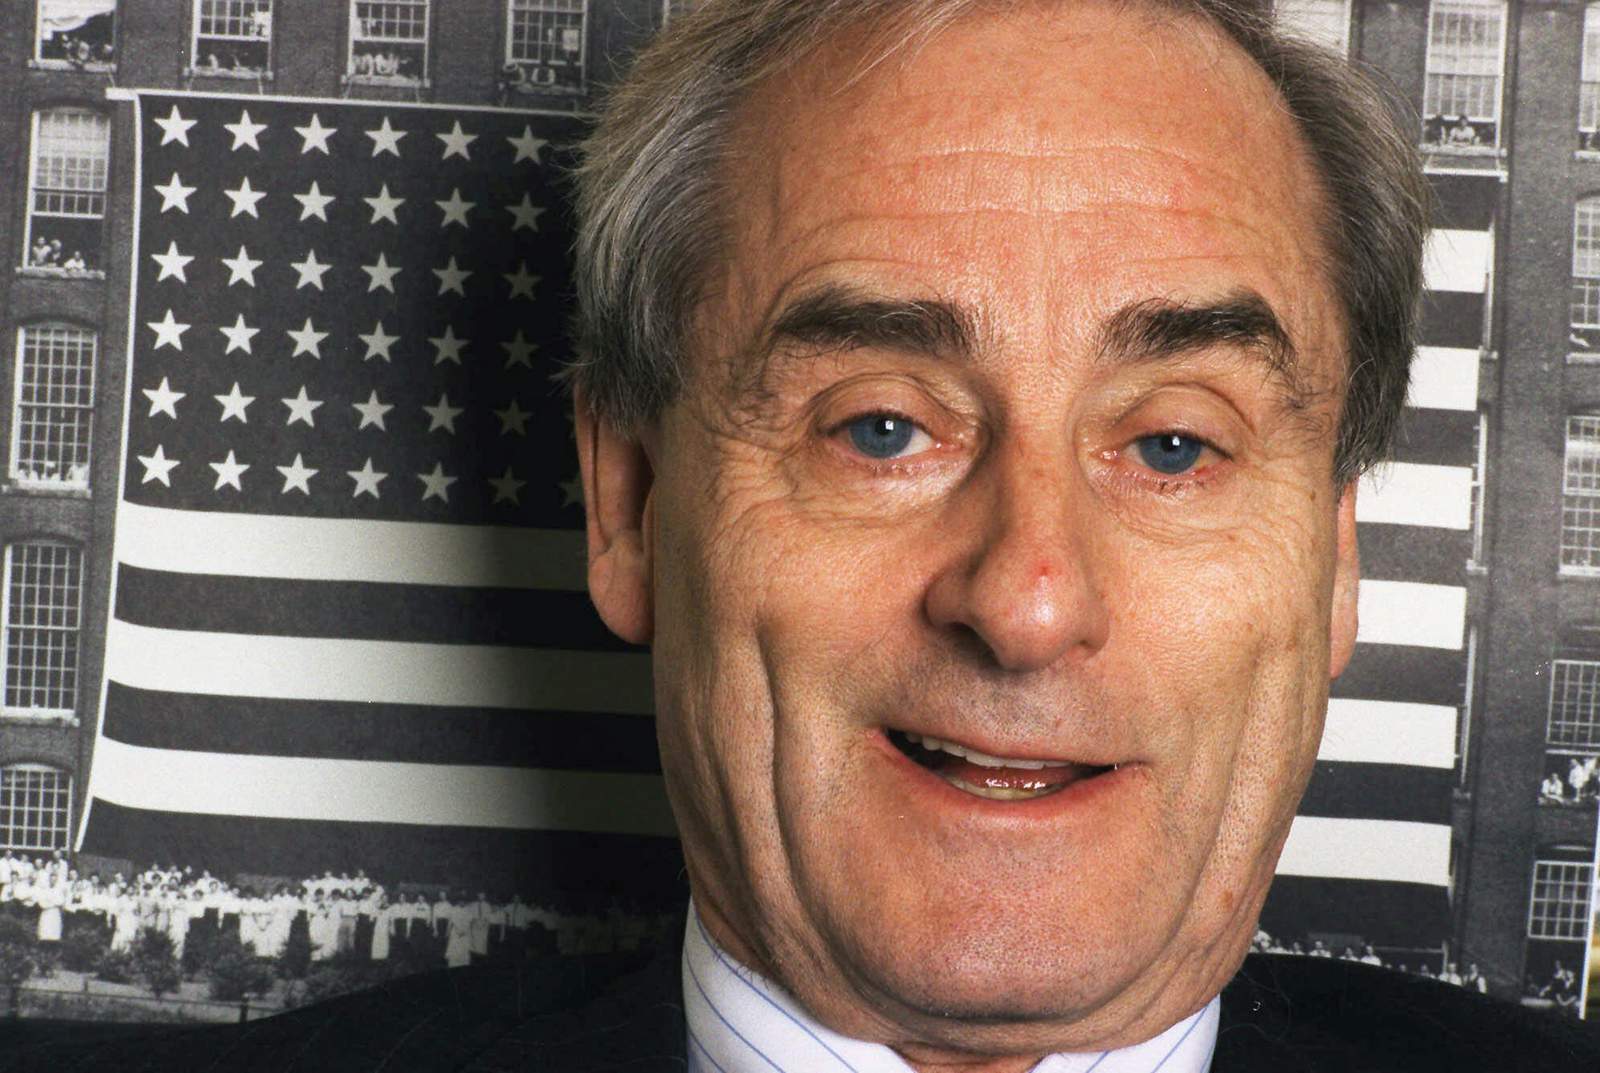 Sir Harold Evans, crusading publisher and author, dies at 92